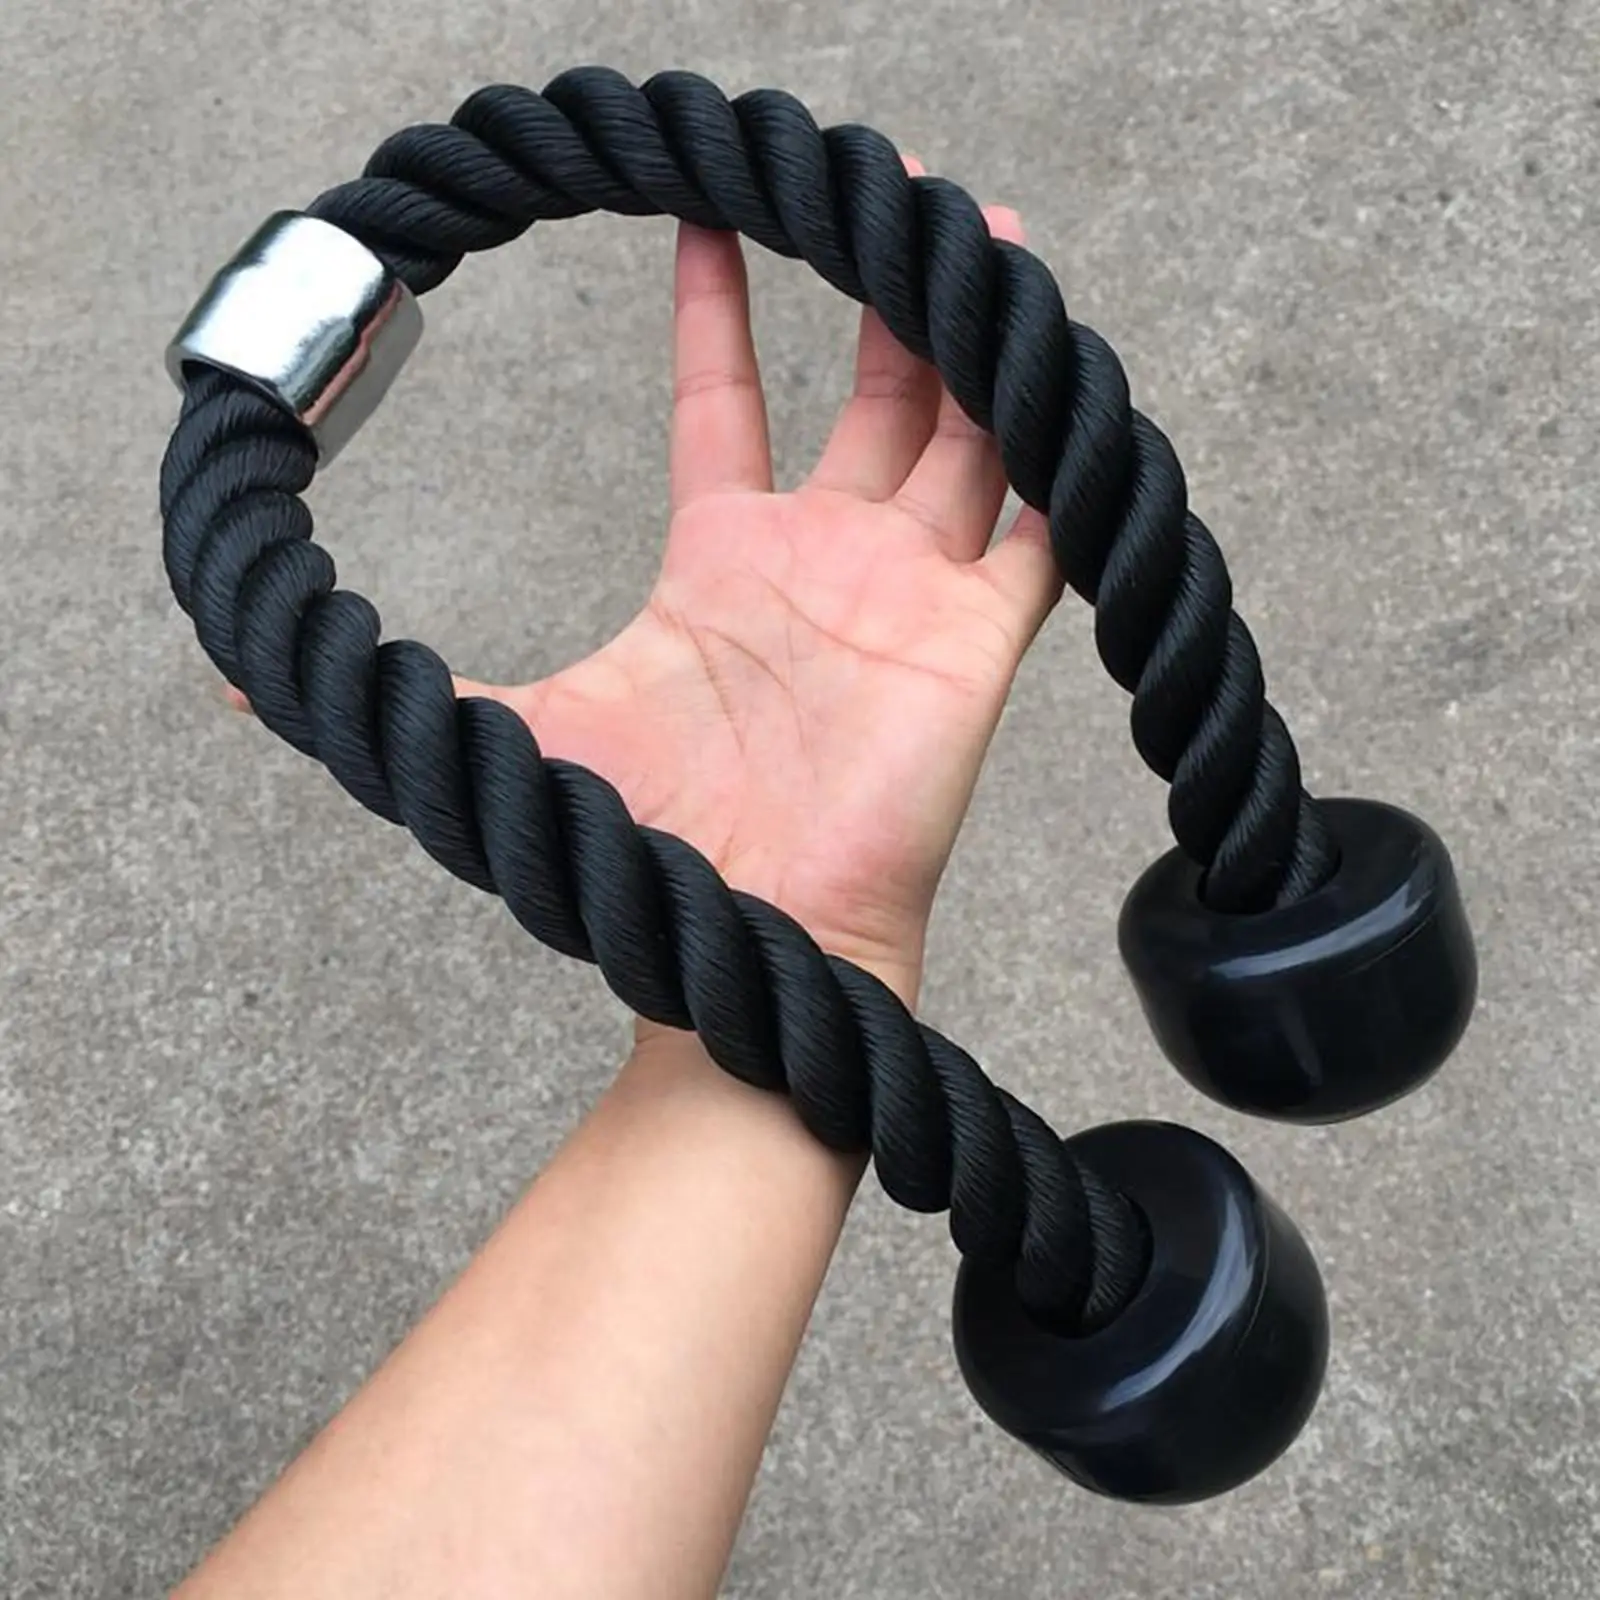 27 `` Triceps Biceps Rope Unwinding Cable Handle Attachment to Multigym